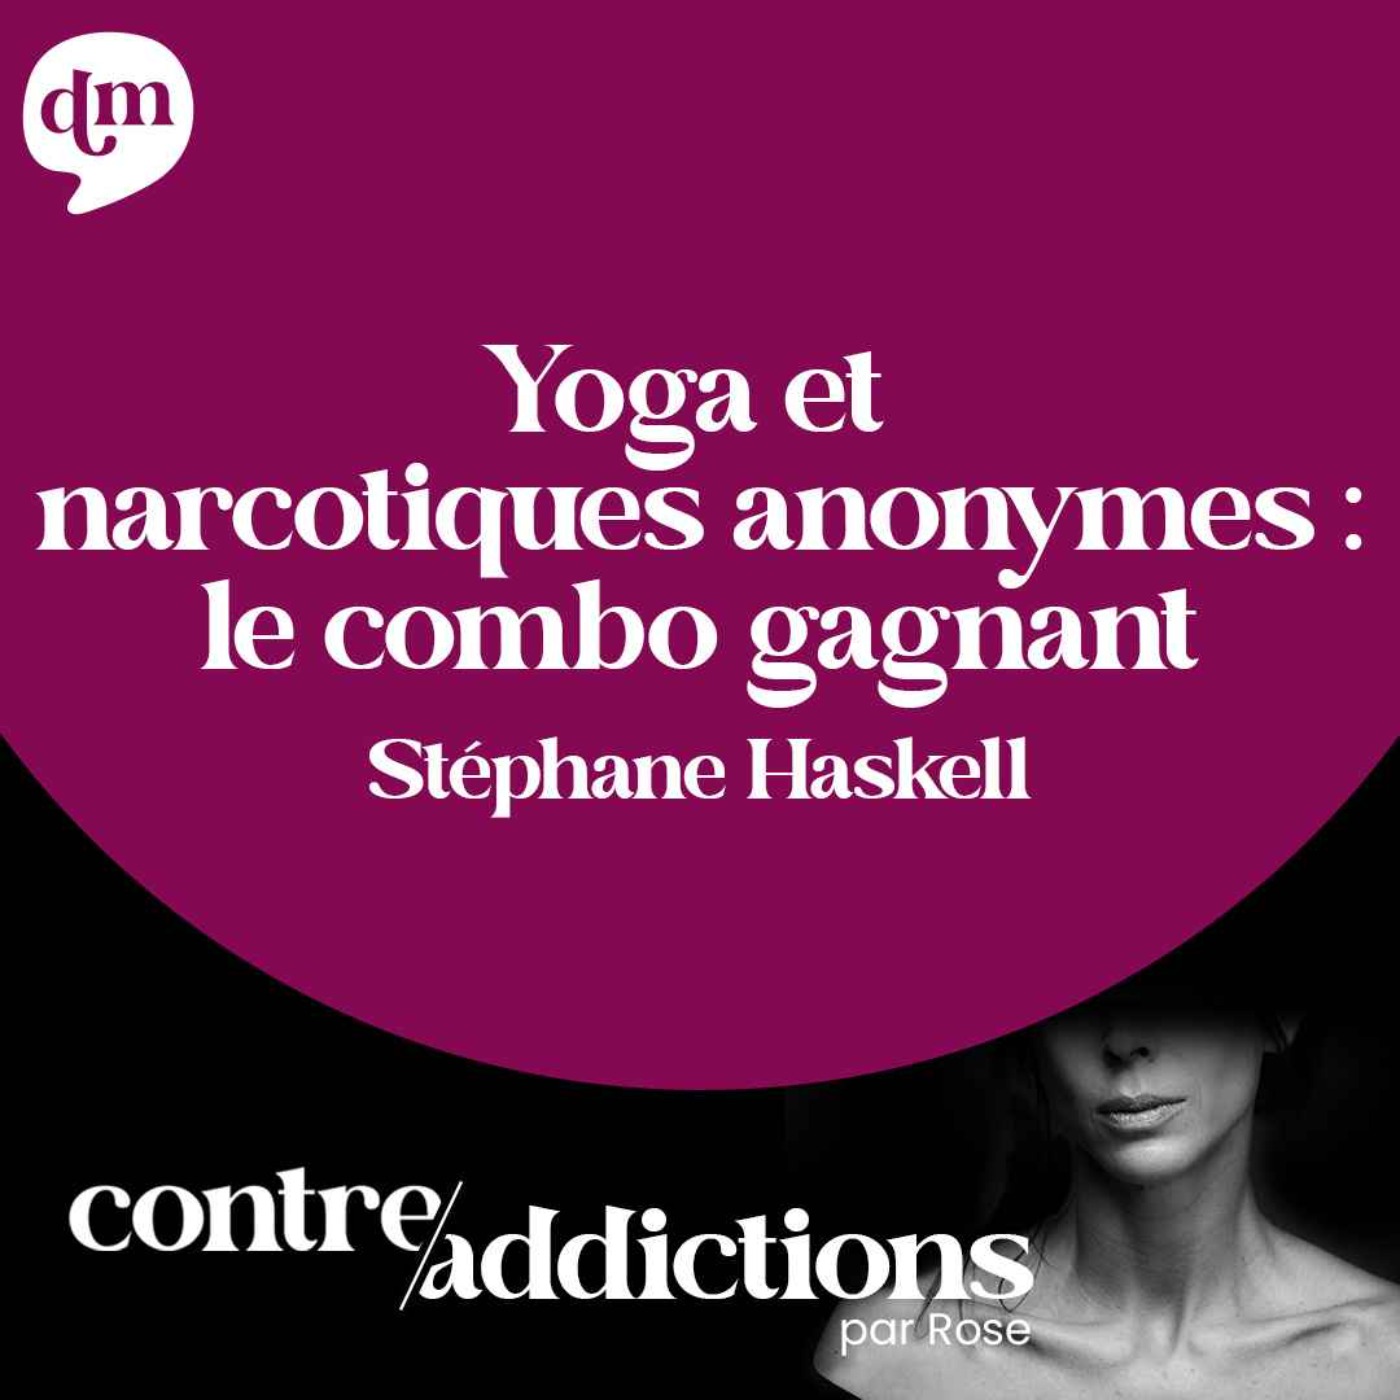 S1E9 - Yoga et narcotiques anonymes : le combo gagnant - Stéphane Haskell